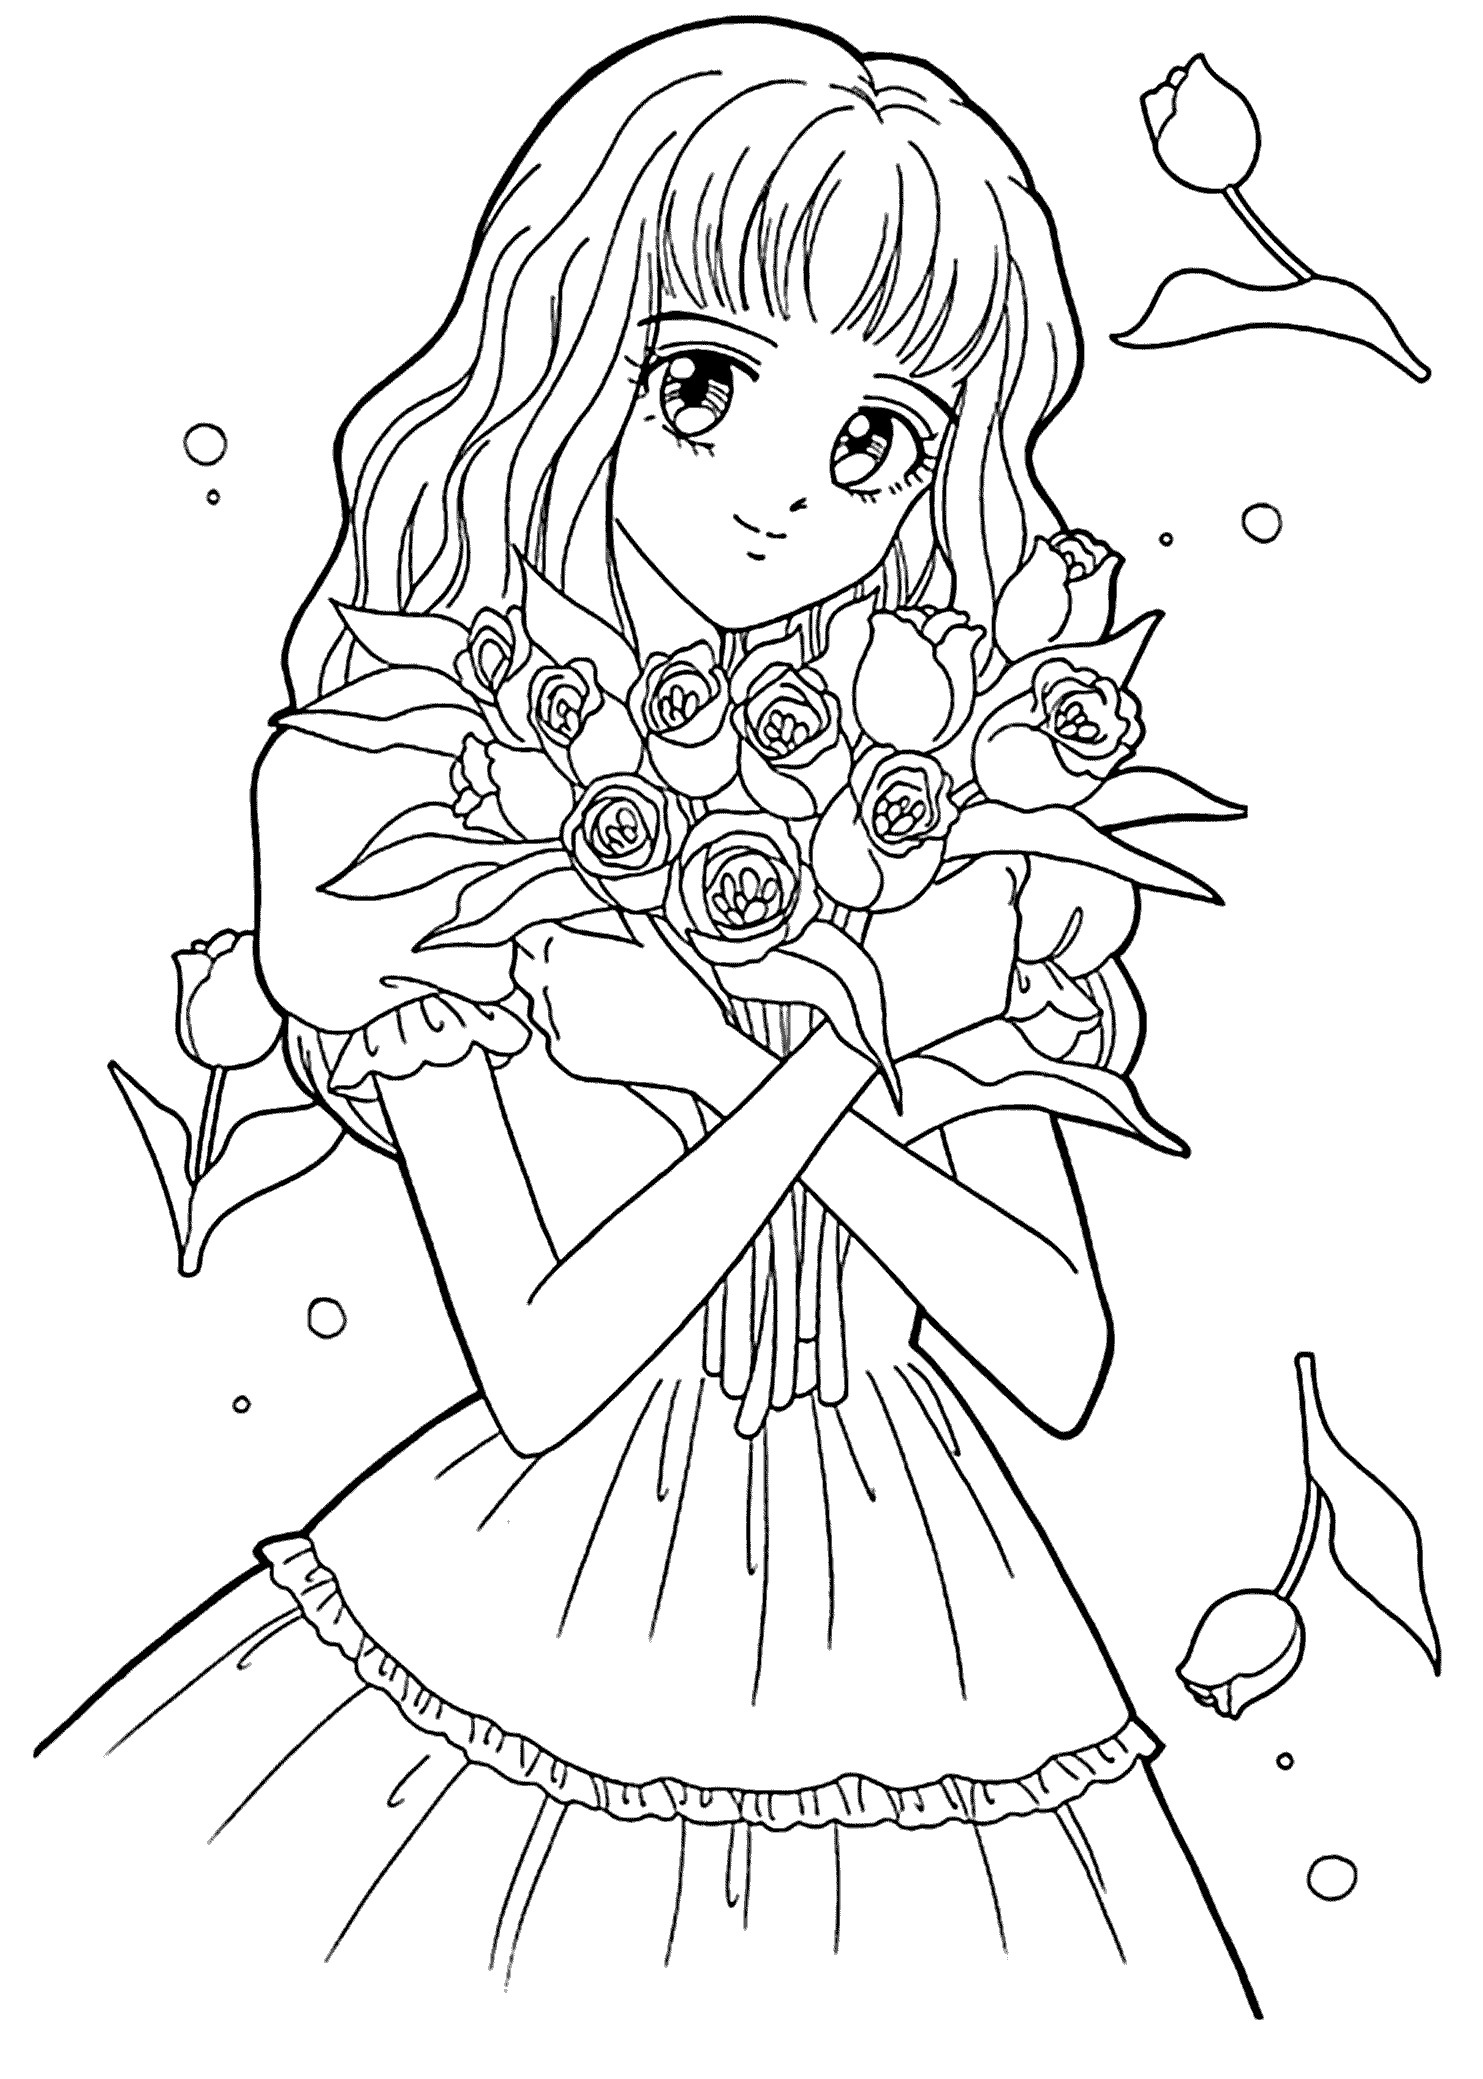 Pretty Girl Coloring Pages To Print
 Best Free Printable Coloring Pages for Kids and Teens